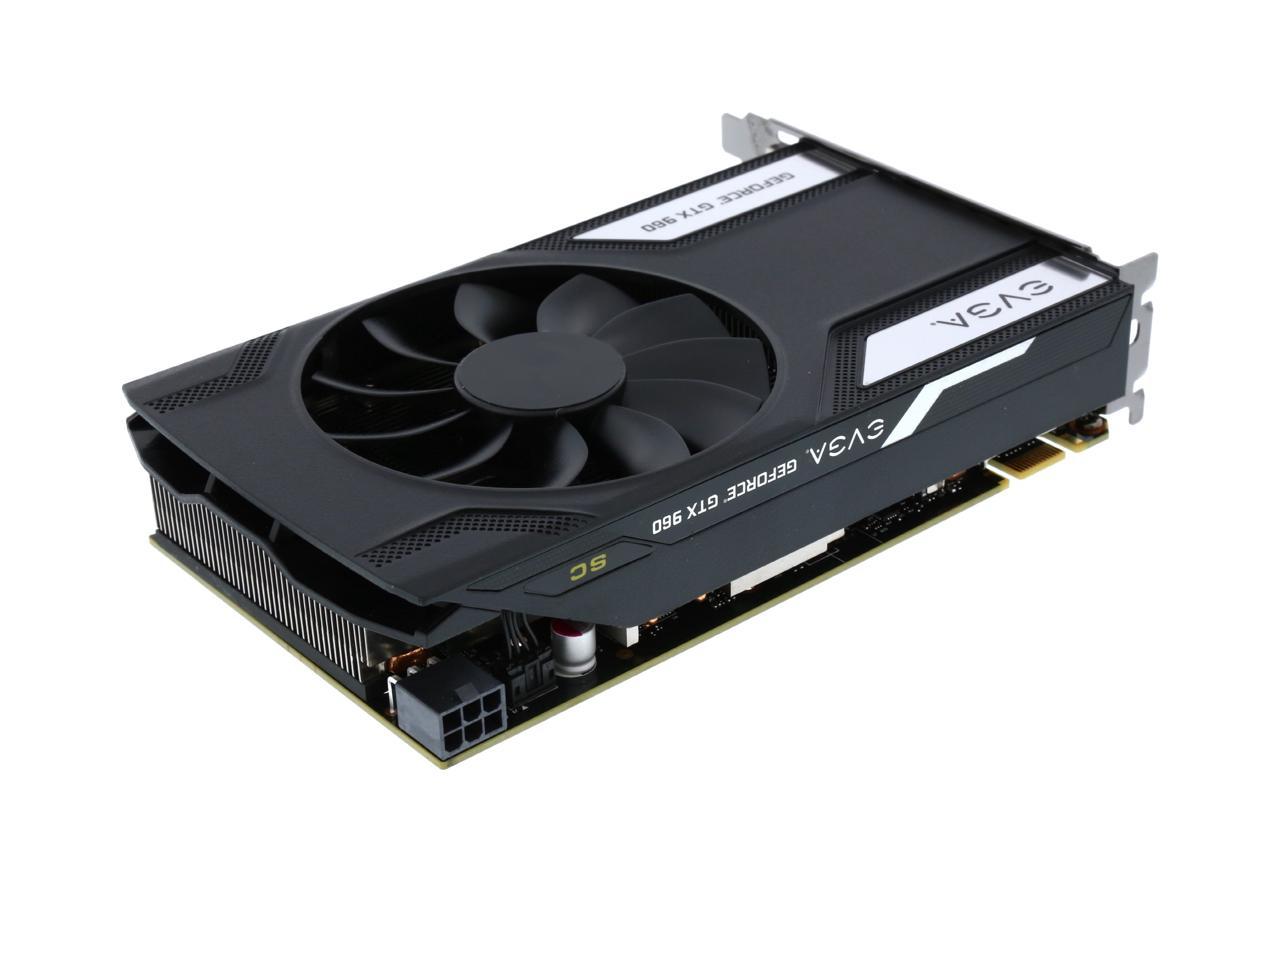 Evga Geforce Gtx 960 04g P4 3962 Kr 4gb Sc Gaming Only 6 8 Inches Perfect For Mitx Build Graphics Card Newegg Com